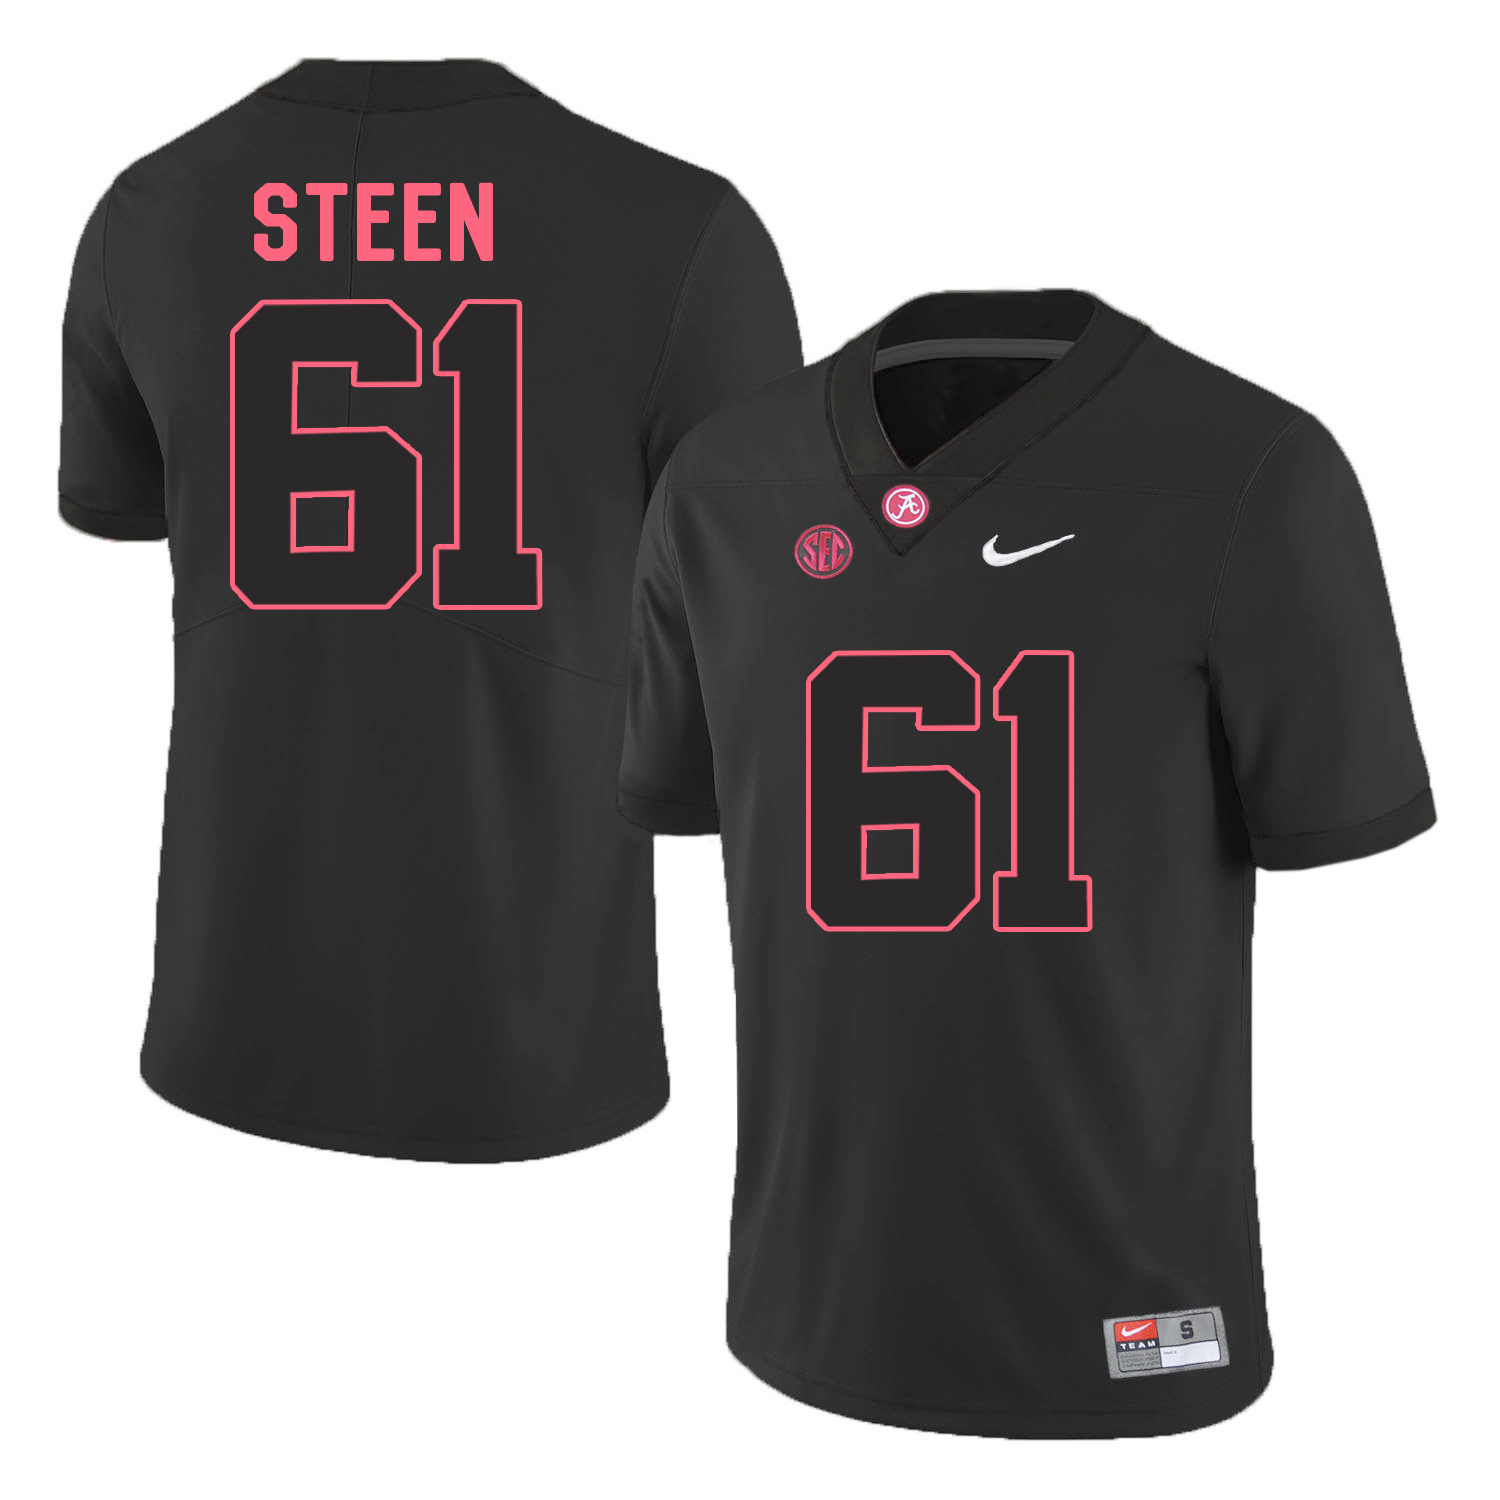 Alabama Crimson Tide 61 Anthony Steen Black College Football Jersey - Click Image to Close